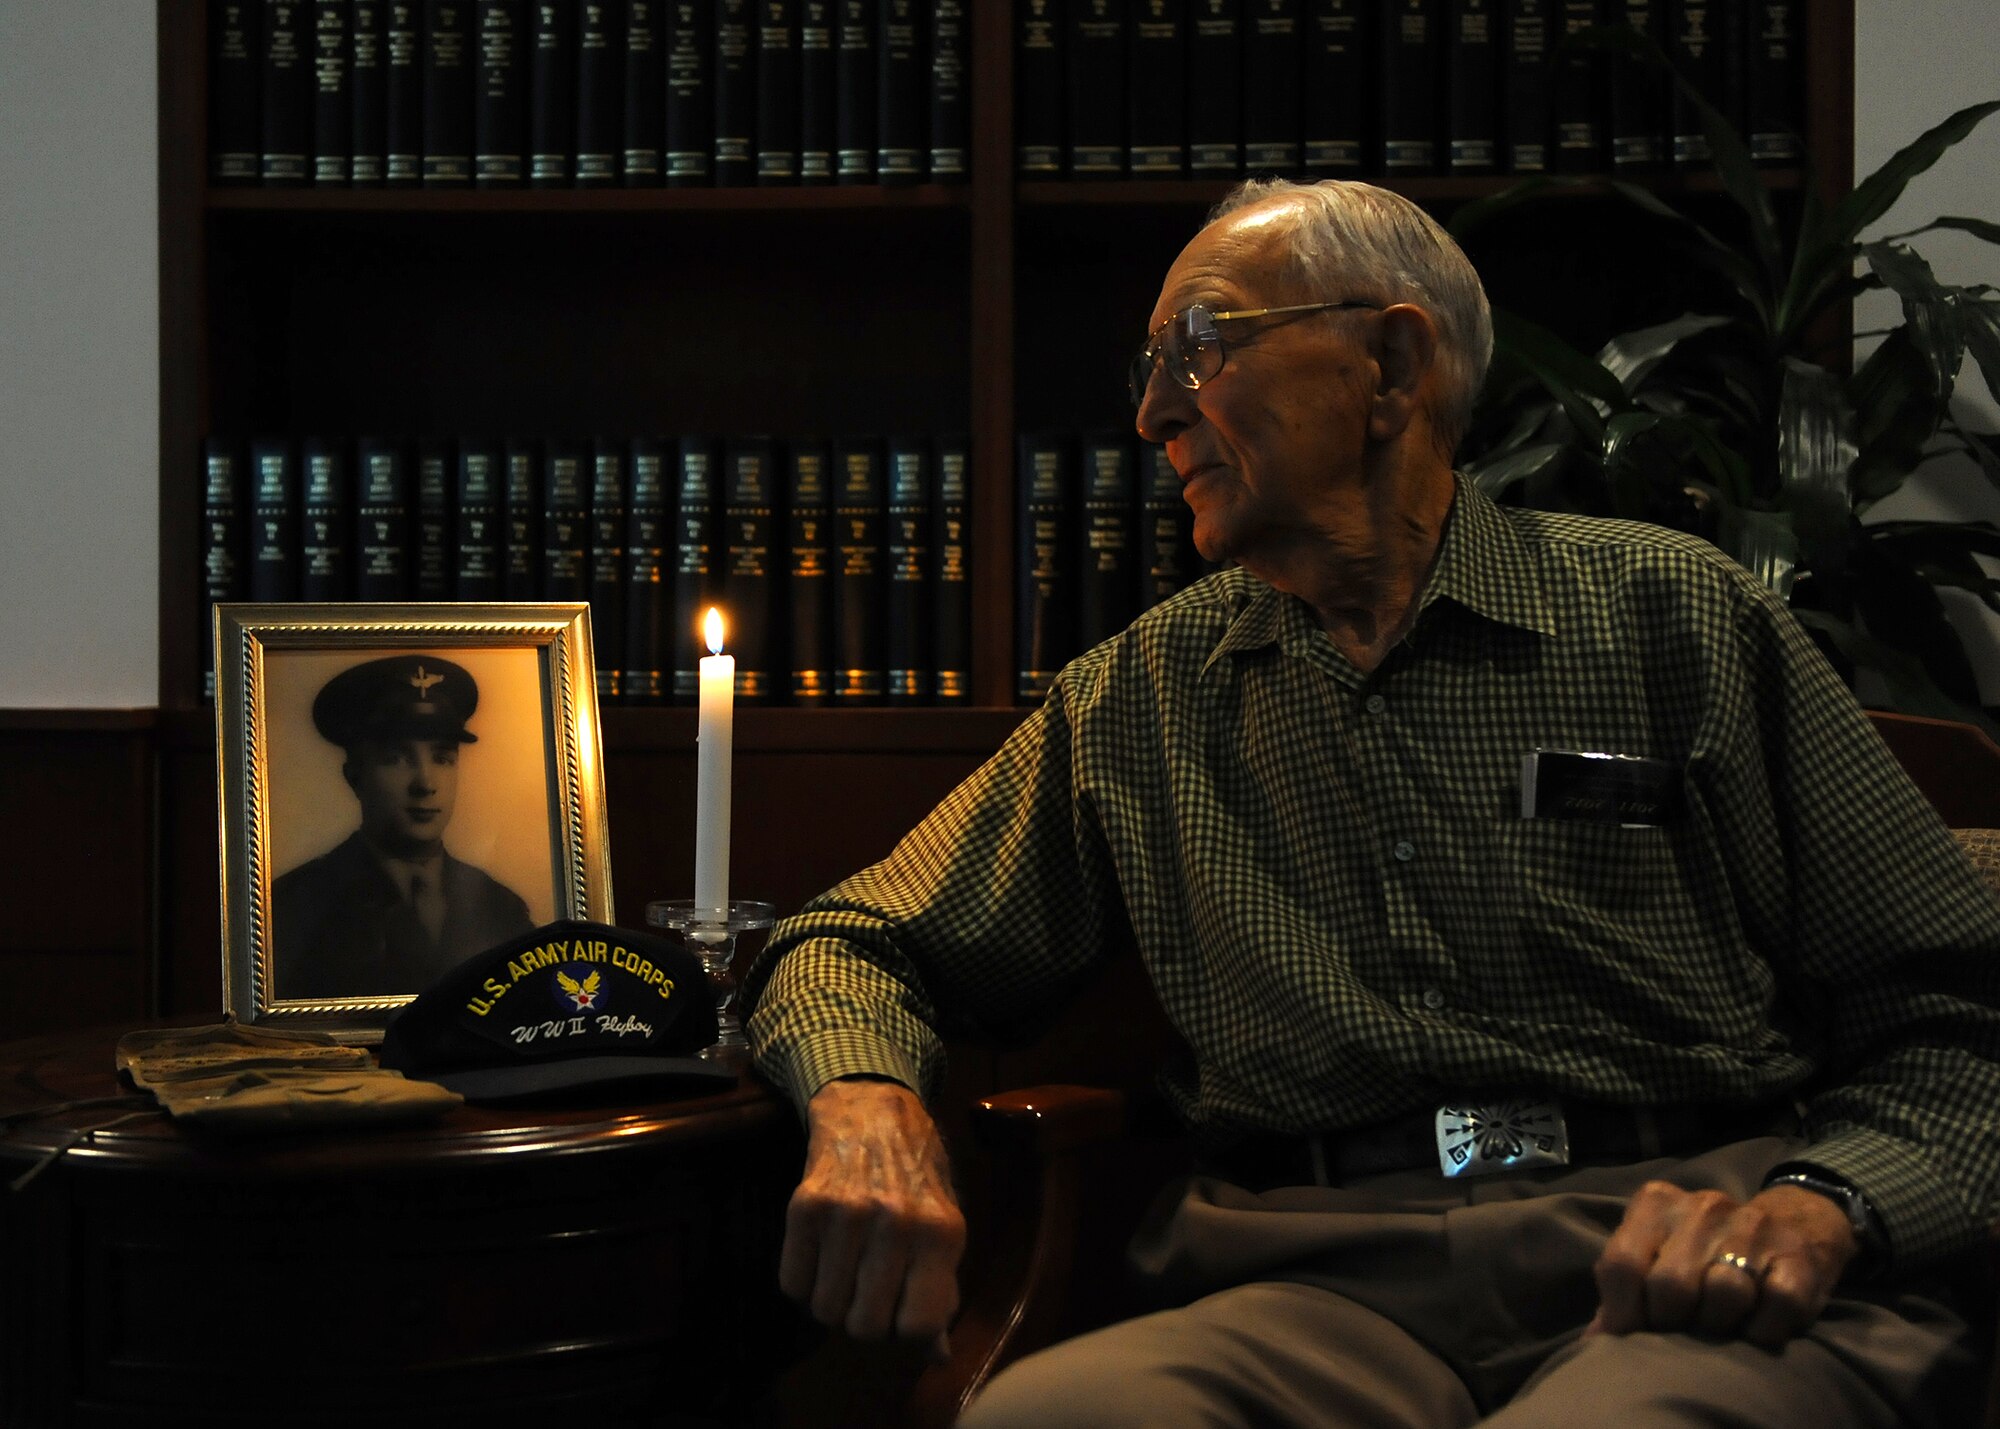 BUCKLEY AIR FORCE BASE, Colo. -- Harry Johnson, World War II veteran speaks about his experience during the war, Aug, 13, 2011. Johnson was one of the original members of the 460th Bomb Group in 1945. (U.S. Air Force photo by Senior Airman Marcy Glass)